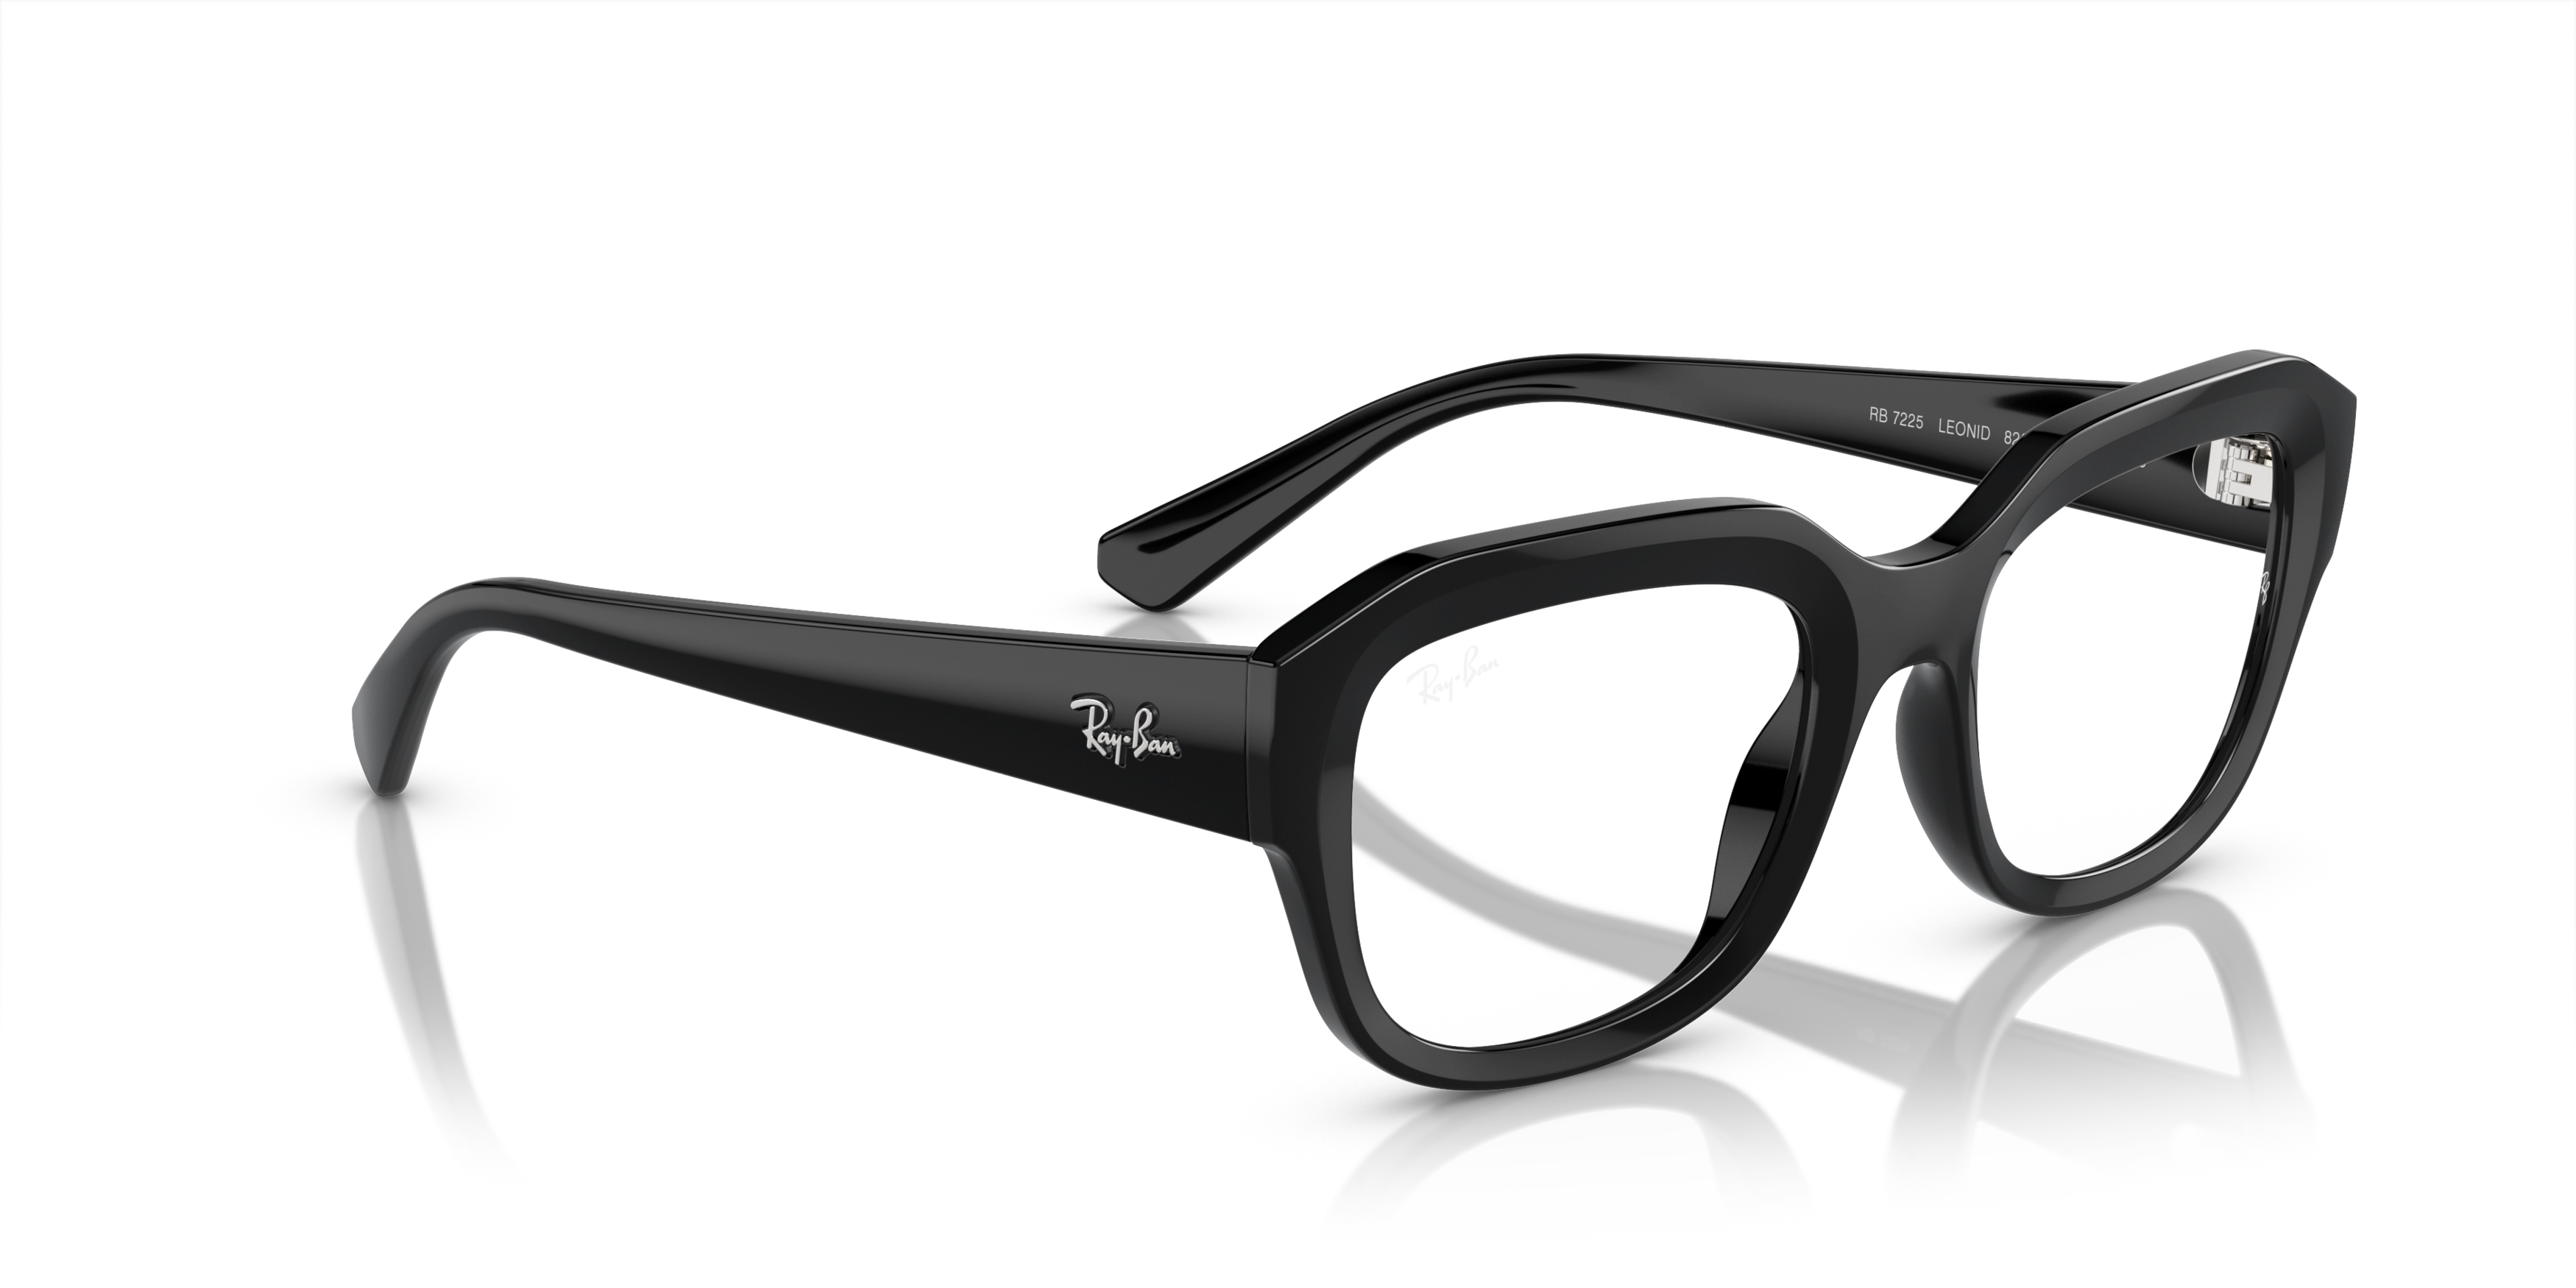 Angle_Right01 Ray-Ban RX 7225 Glasses Transparent / Black